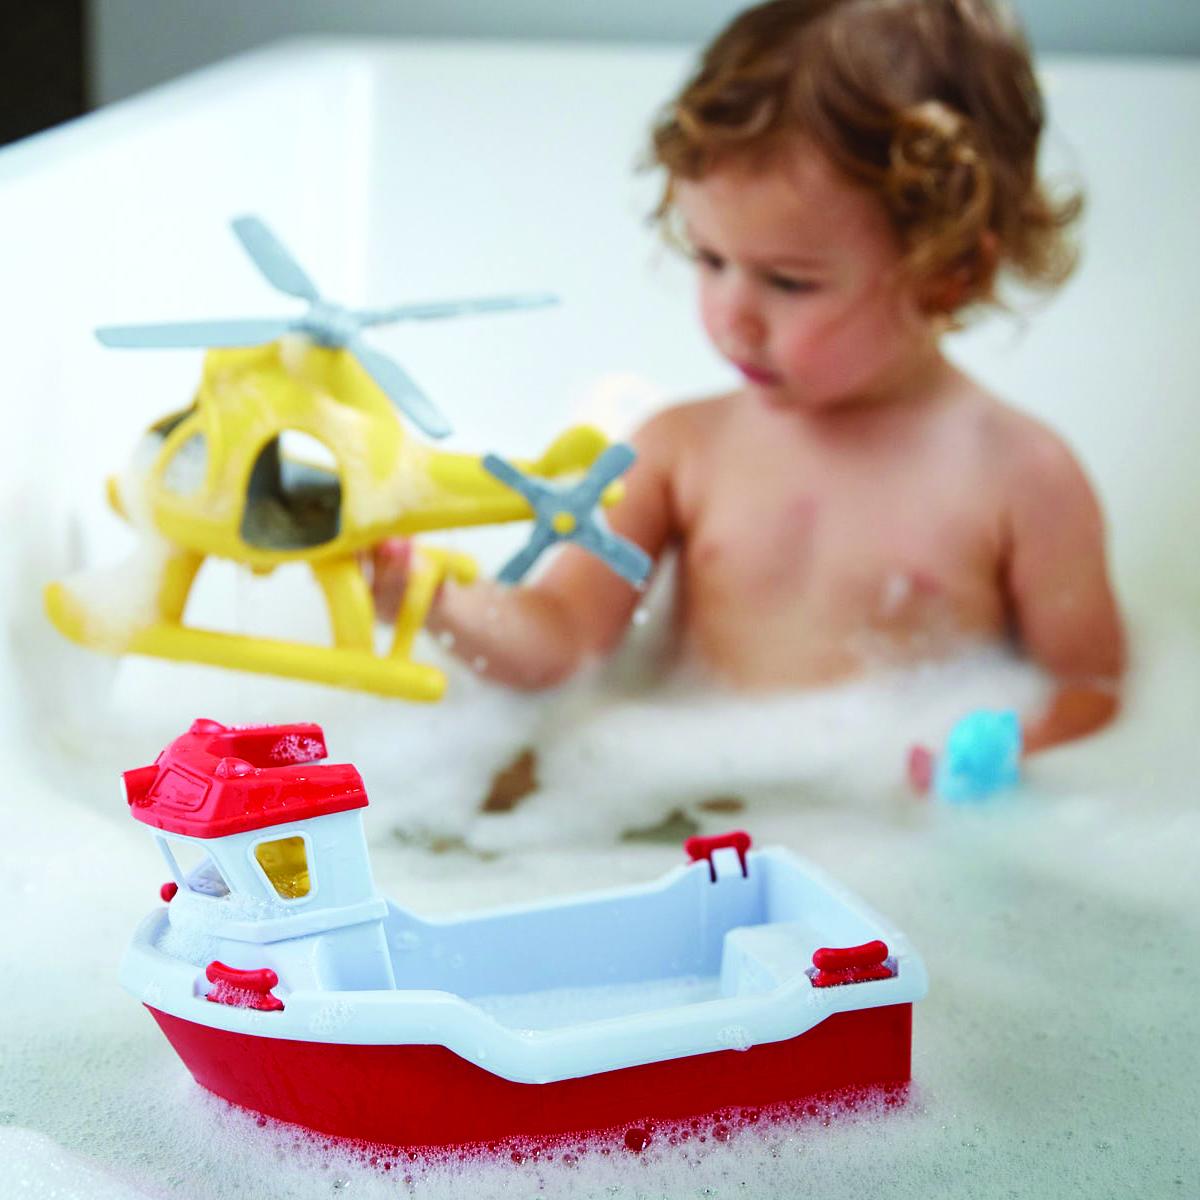 Child in a bubble bath playing with yellow helicopter and red boat.